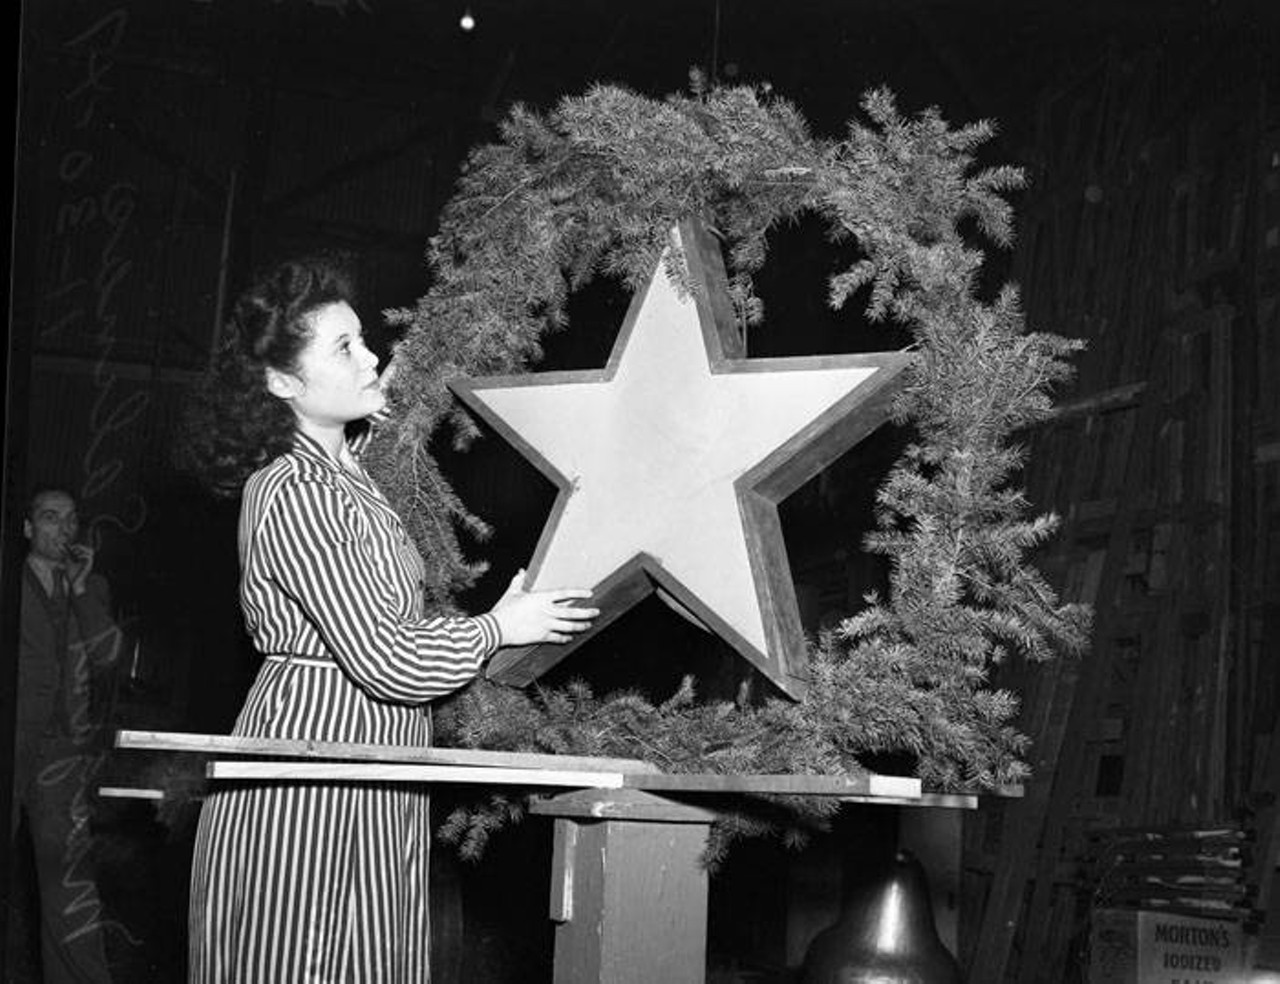 Sometimes you don't realize just how big Christmas decorations can be! Here, Margarett Salinas poses with one of the decorations destined to be hung downtown for the 1947 holiday season.